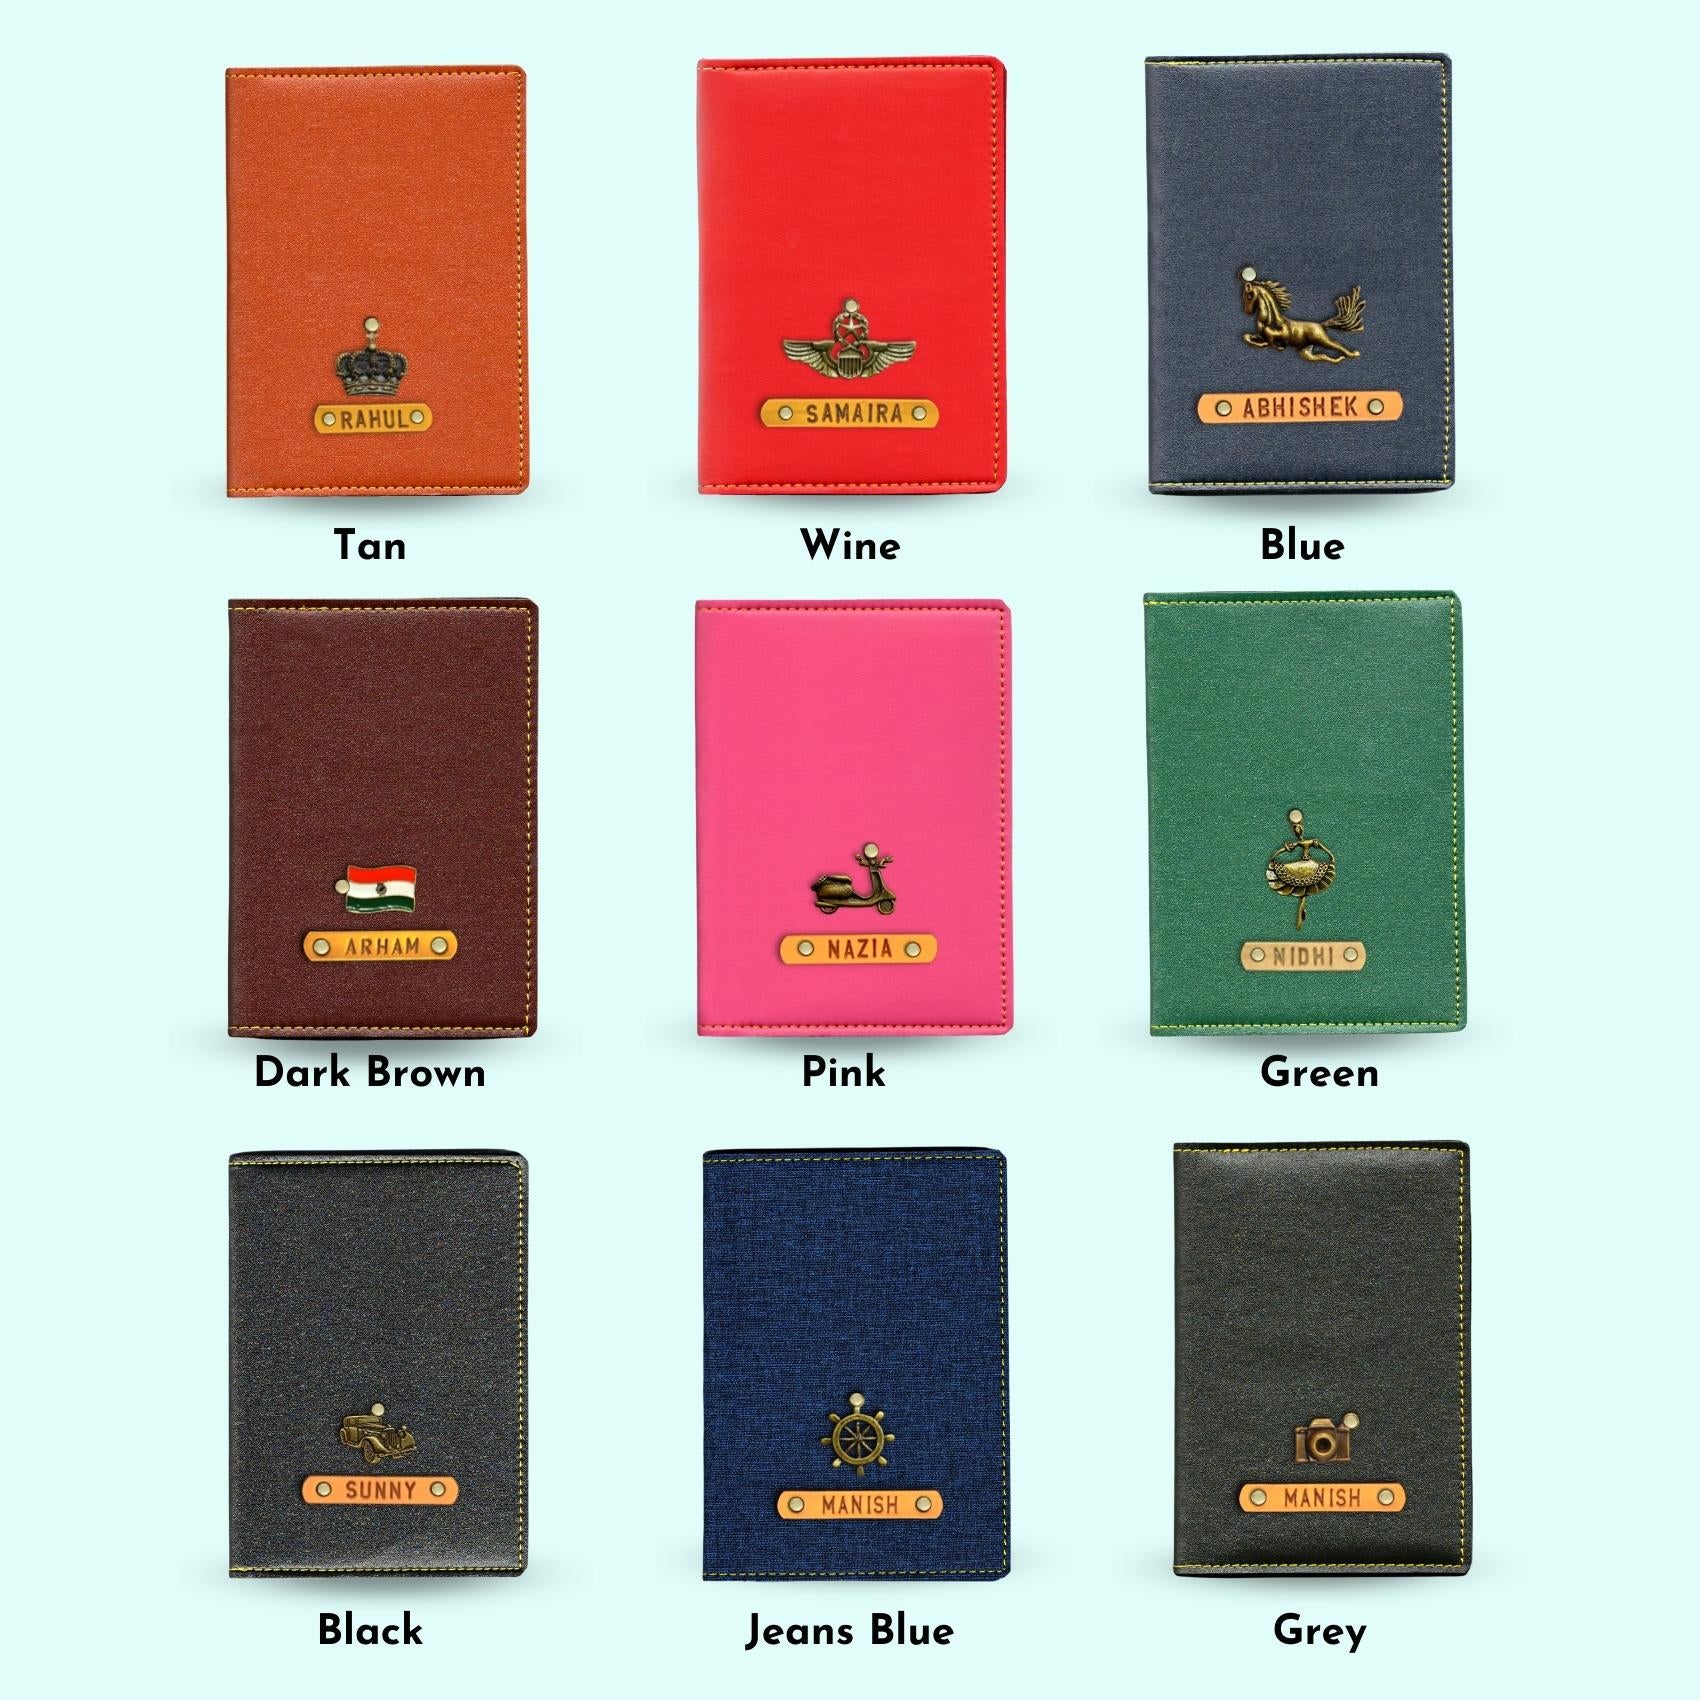 Personalized Passport Cover